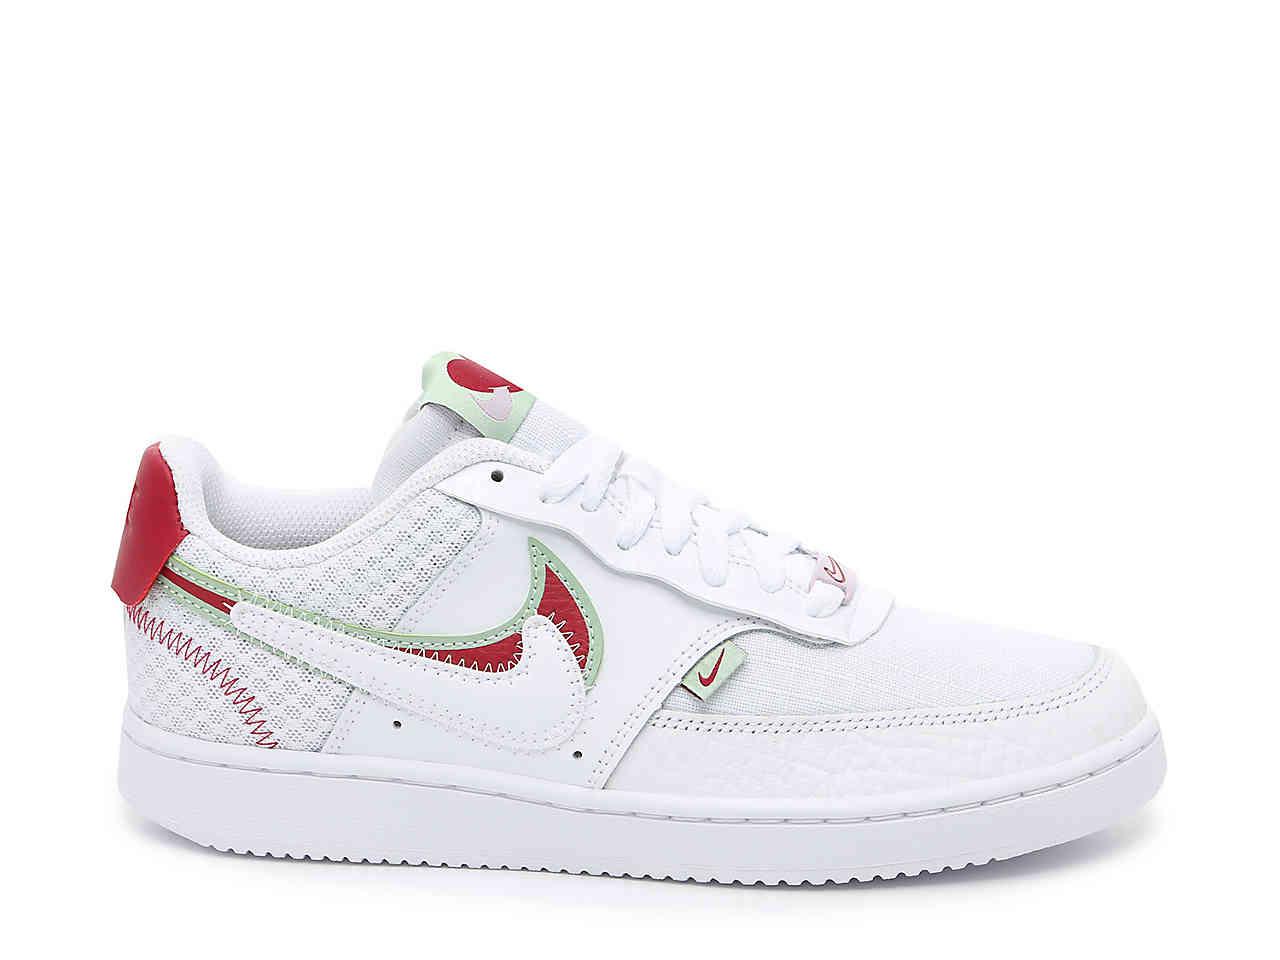 Nike Leather Court Vision Sneaker in White/Burgundy/Lime Green 